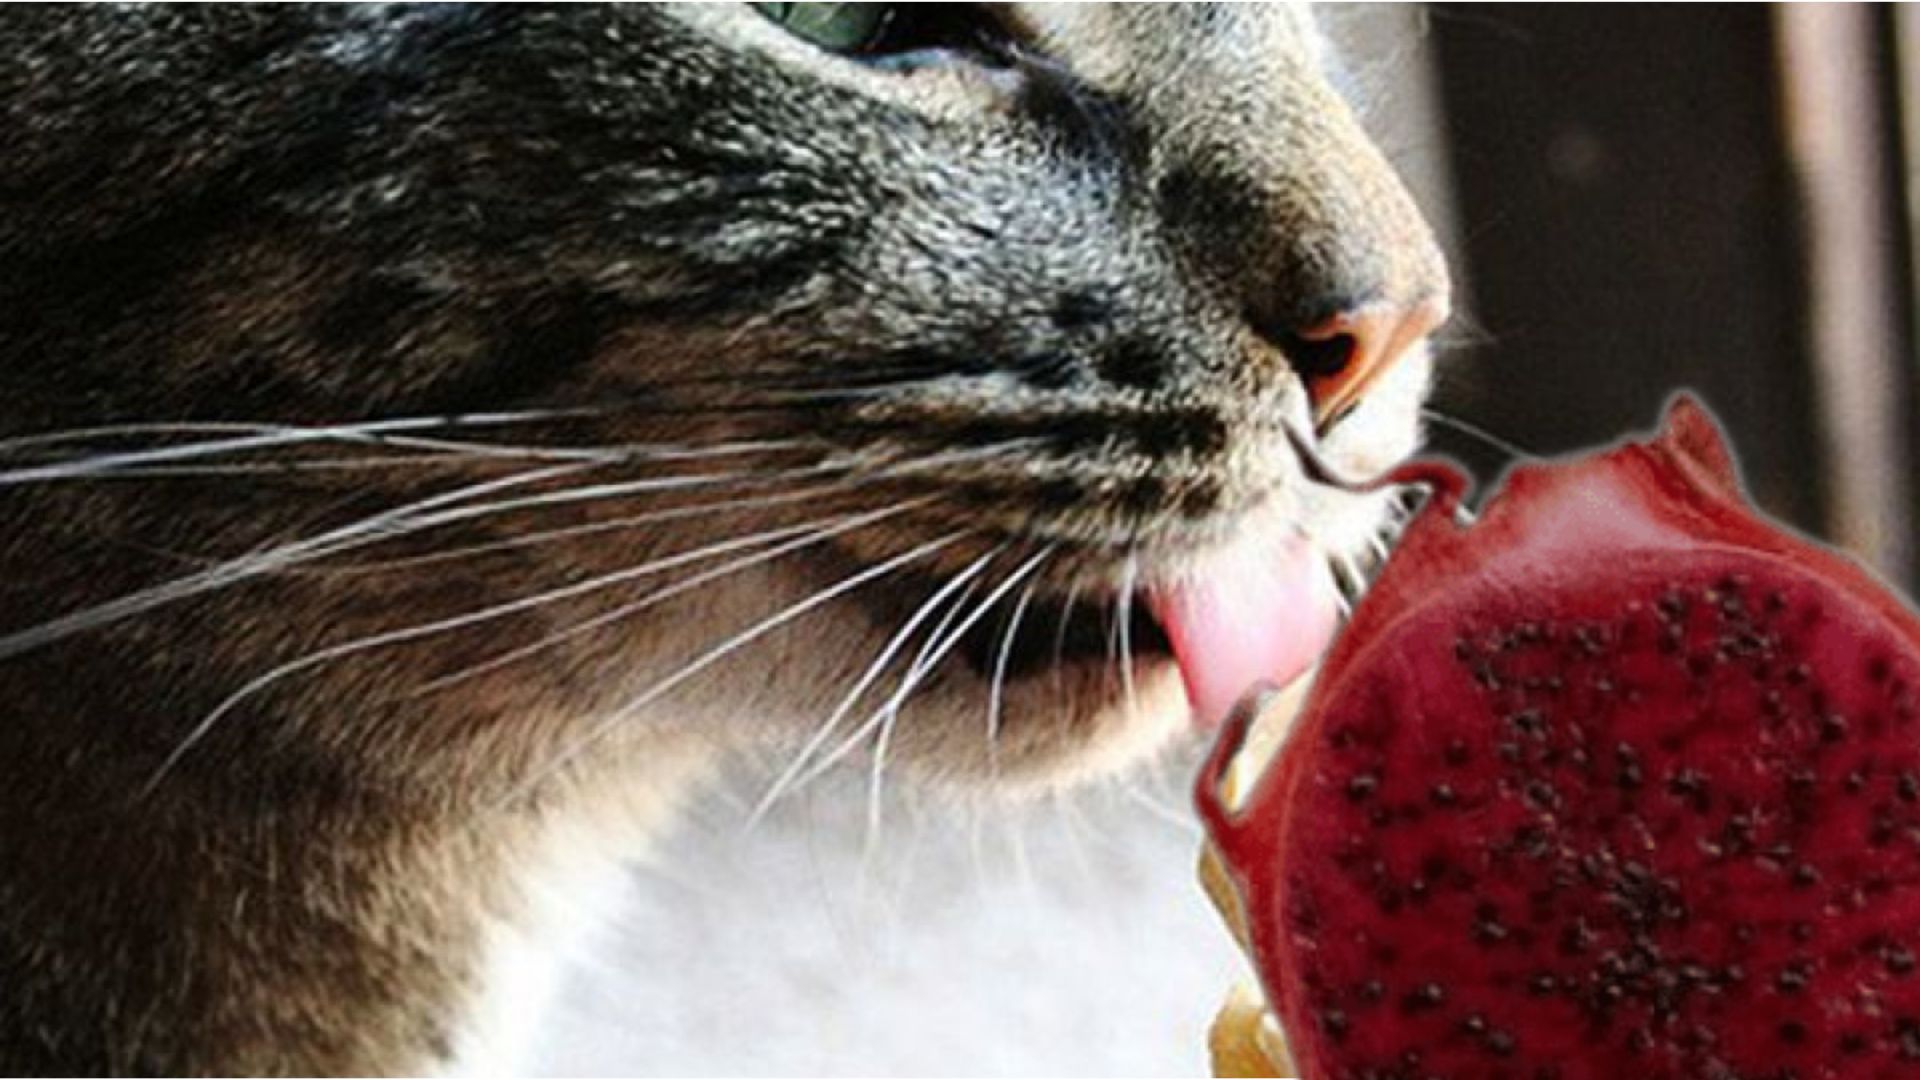 Can cats eat dragon fruit